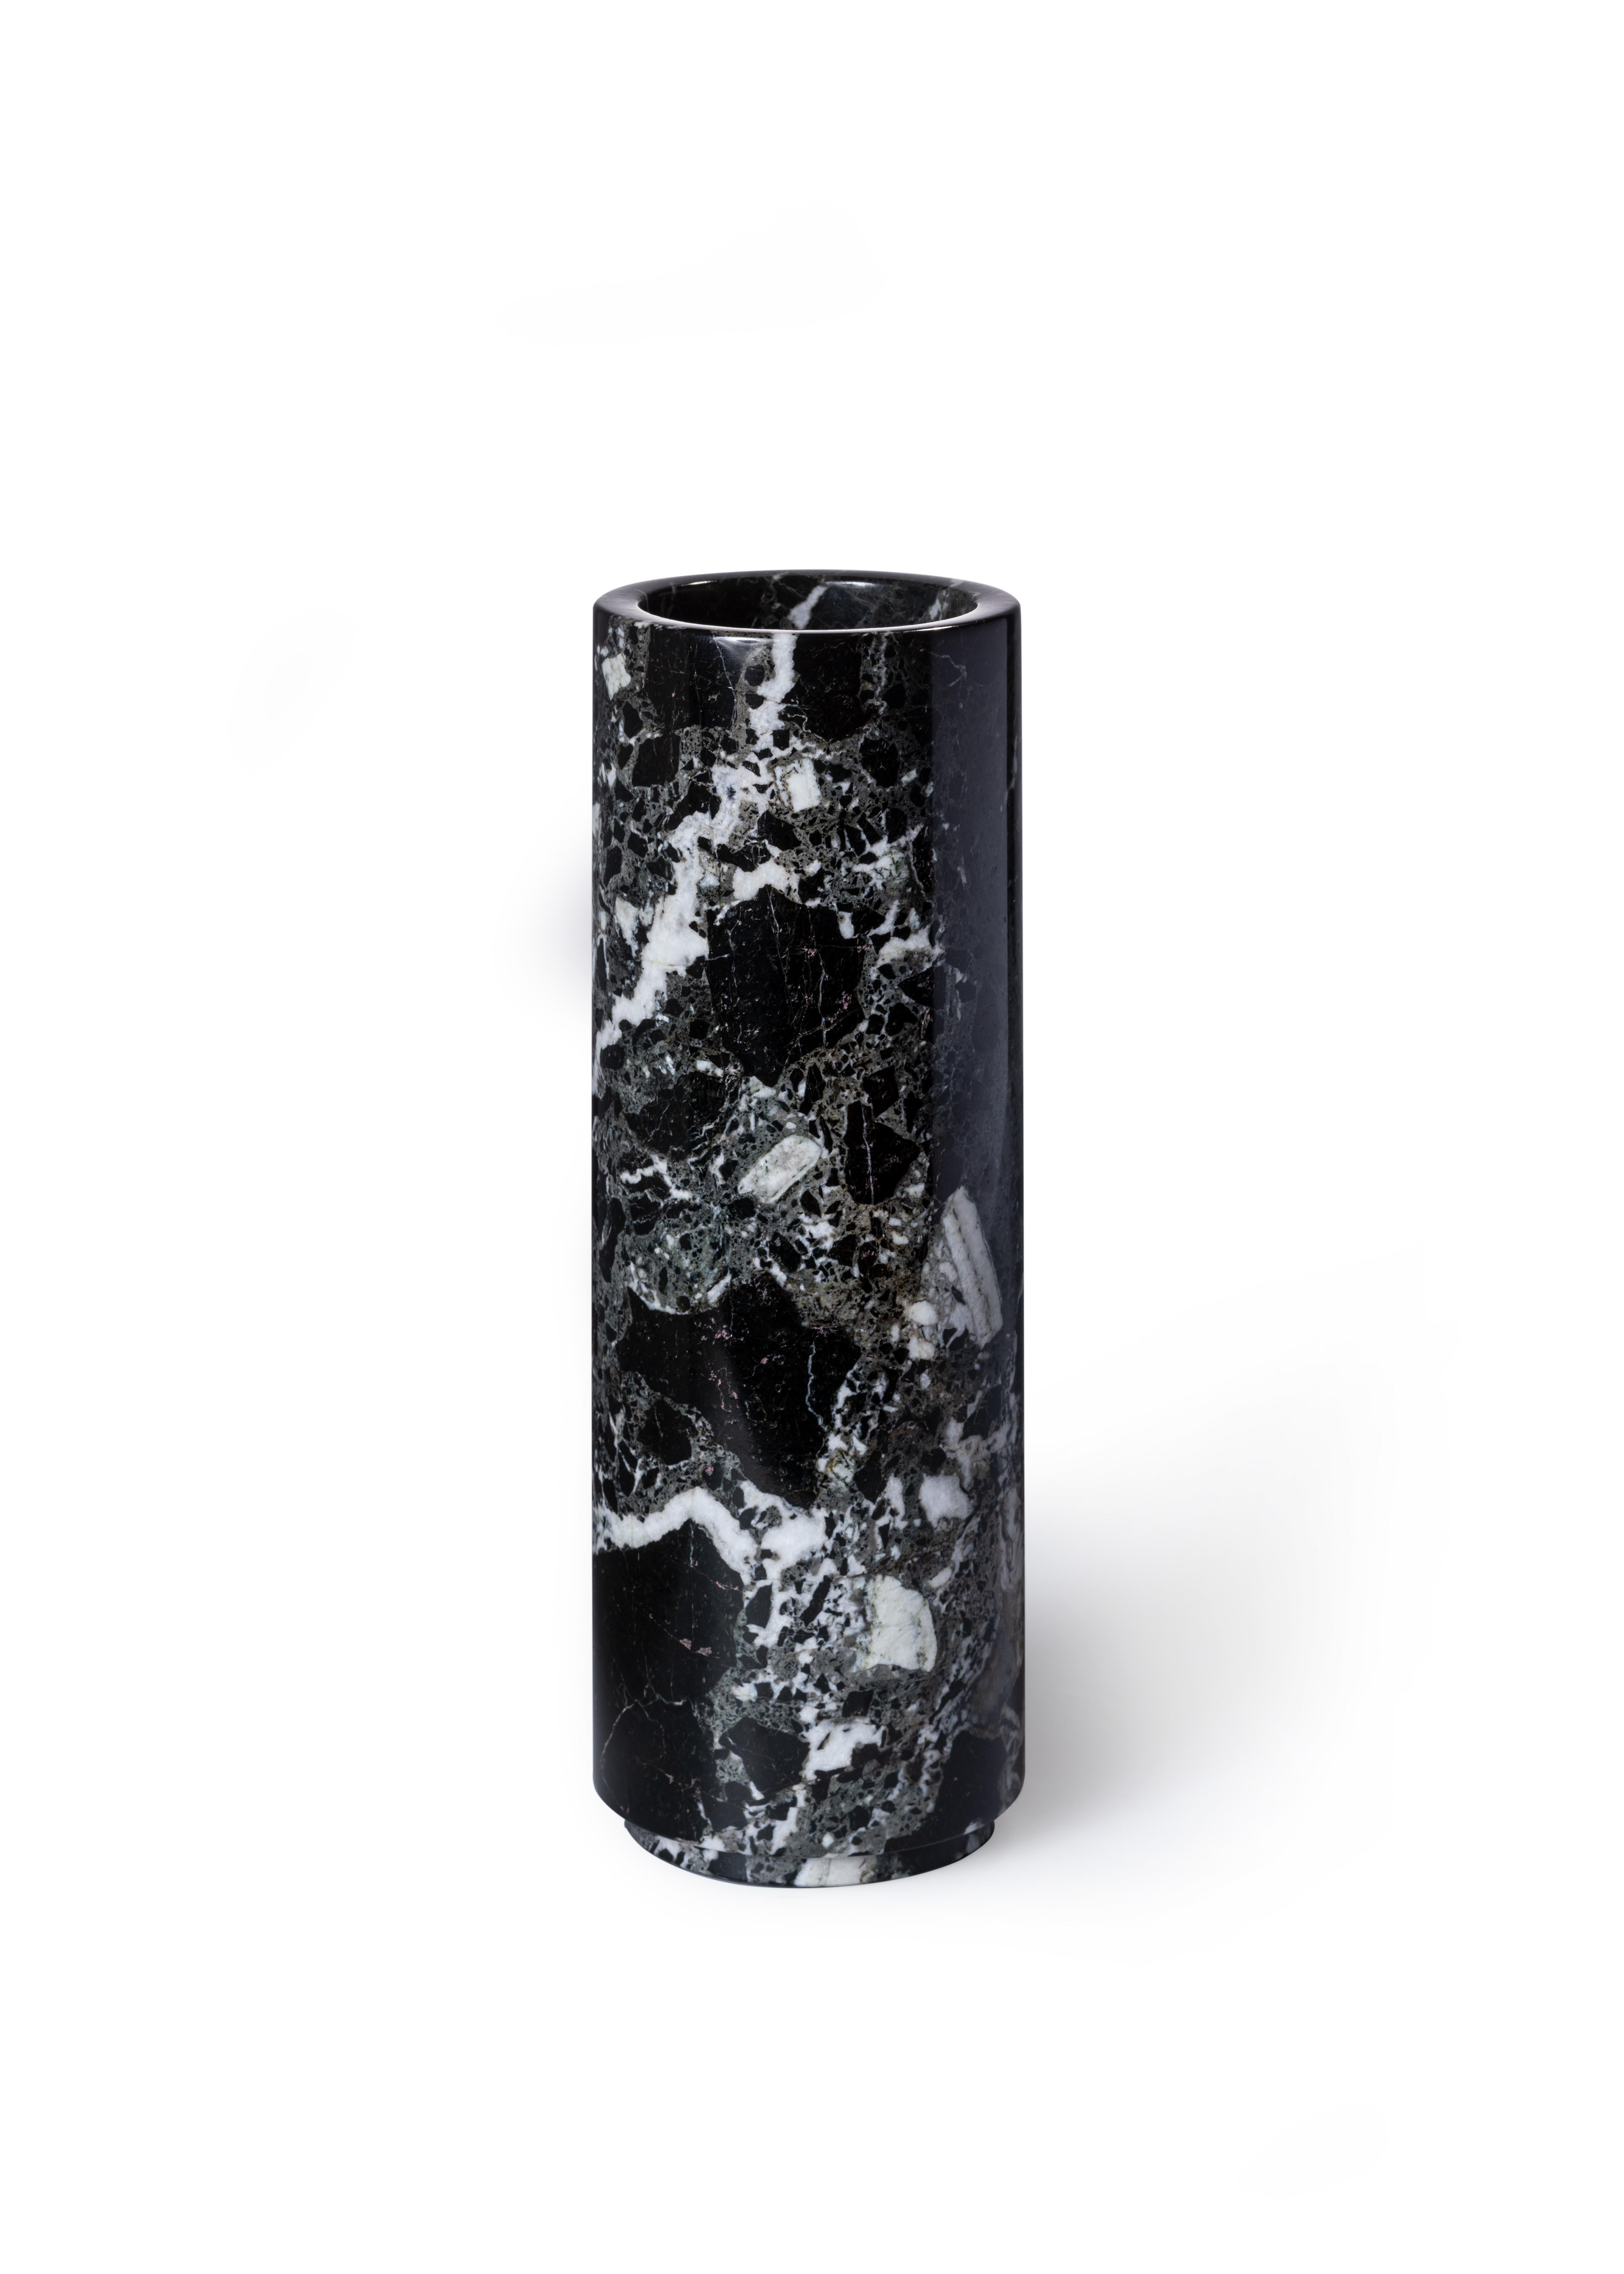 Handcrafted with precision, this vase is inspired by mid-century marble design objects, exuding understated luxury with its sleek simplicity. Eschewing unnecessary embellishments, it embraces clean lines and a timeless aesthetic that effortlessly